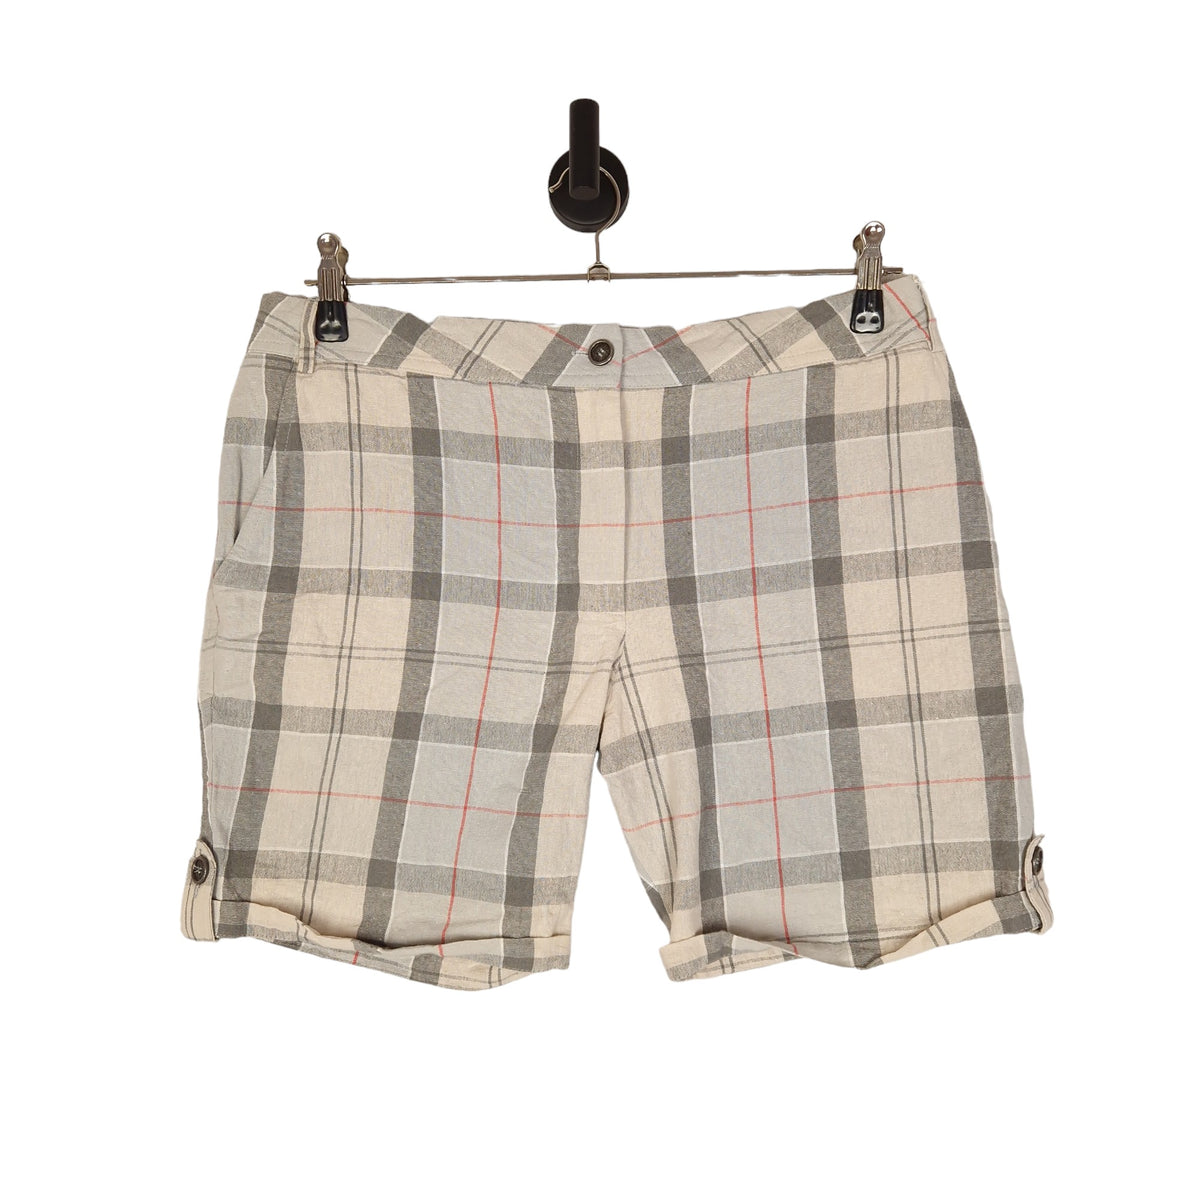 Barbour Roll Tab Linen Shorts - Size UK 14